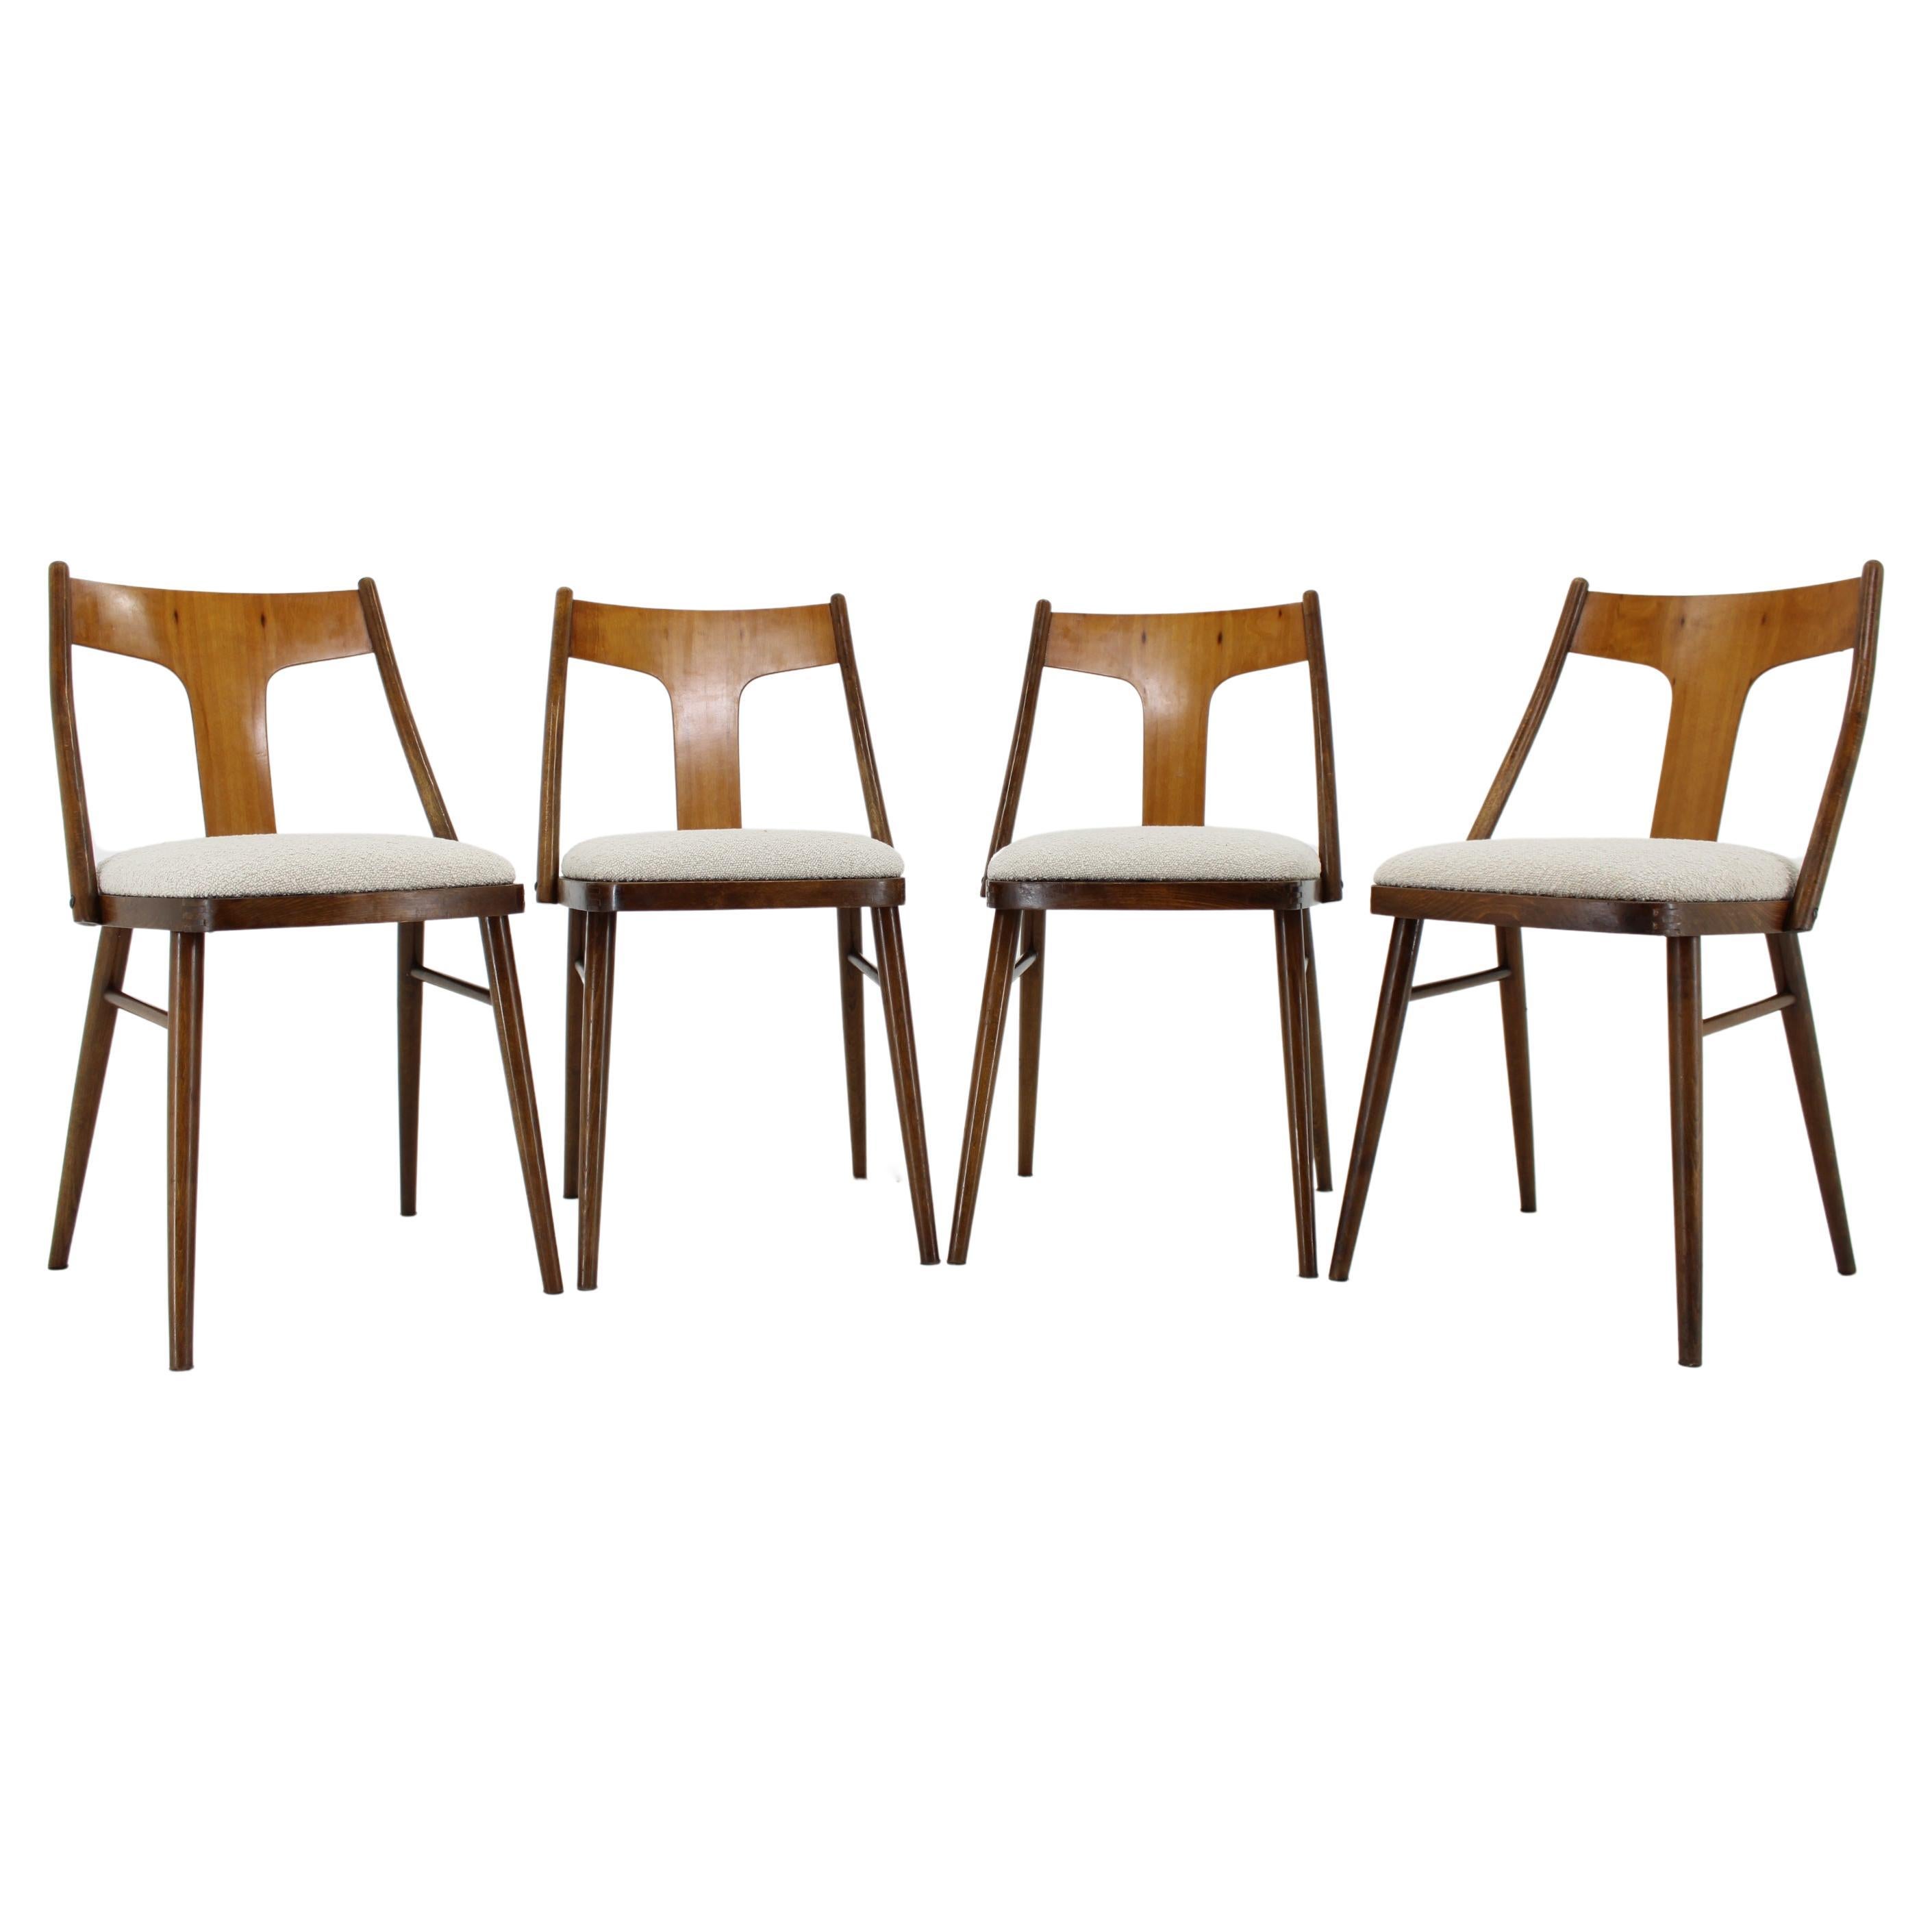 1950s Set of 4 Dining Chairs in Walnut Finish, Czechoslovakia  For Sale